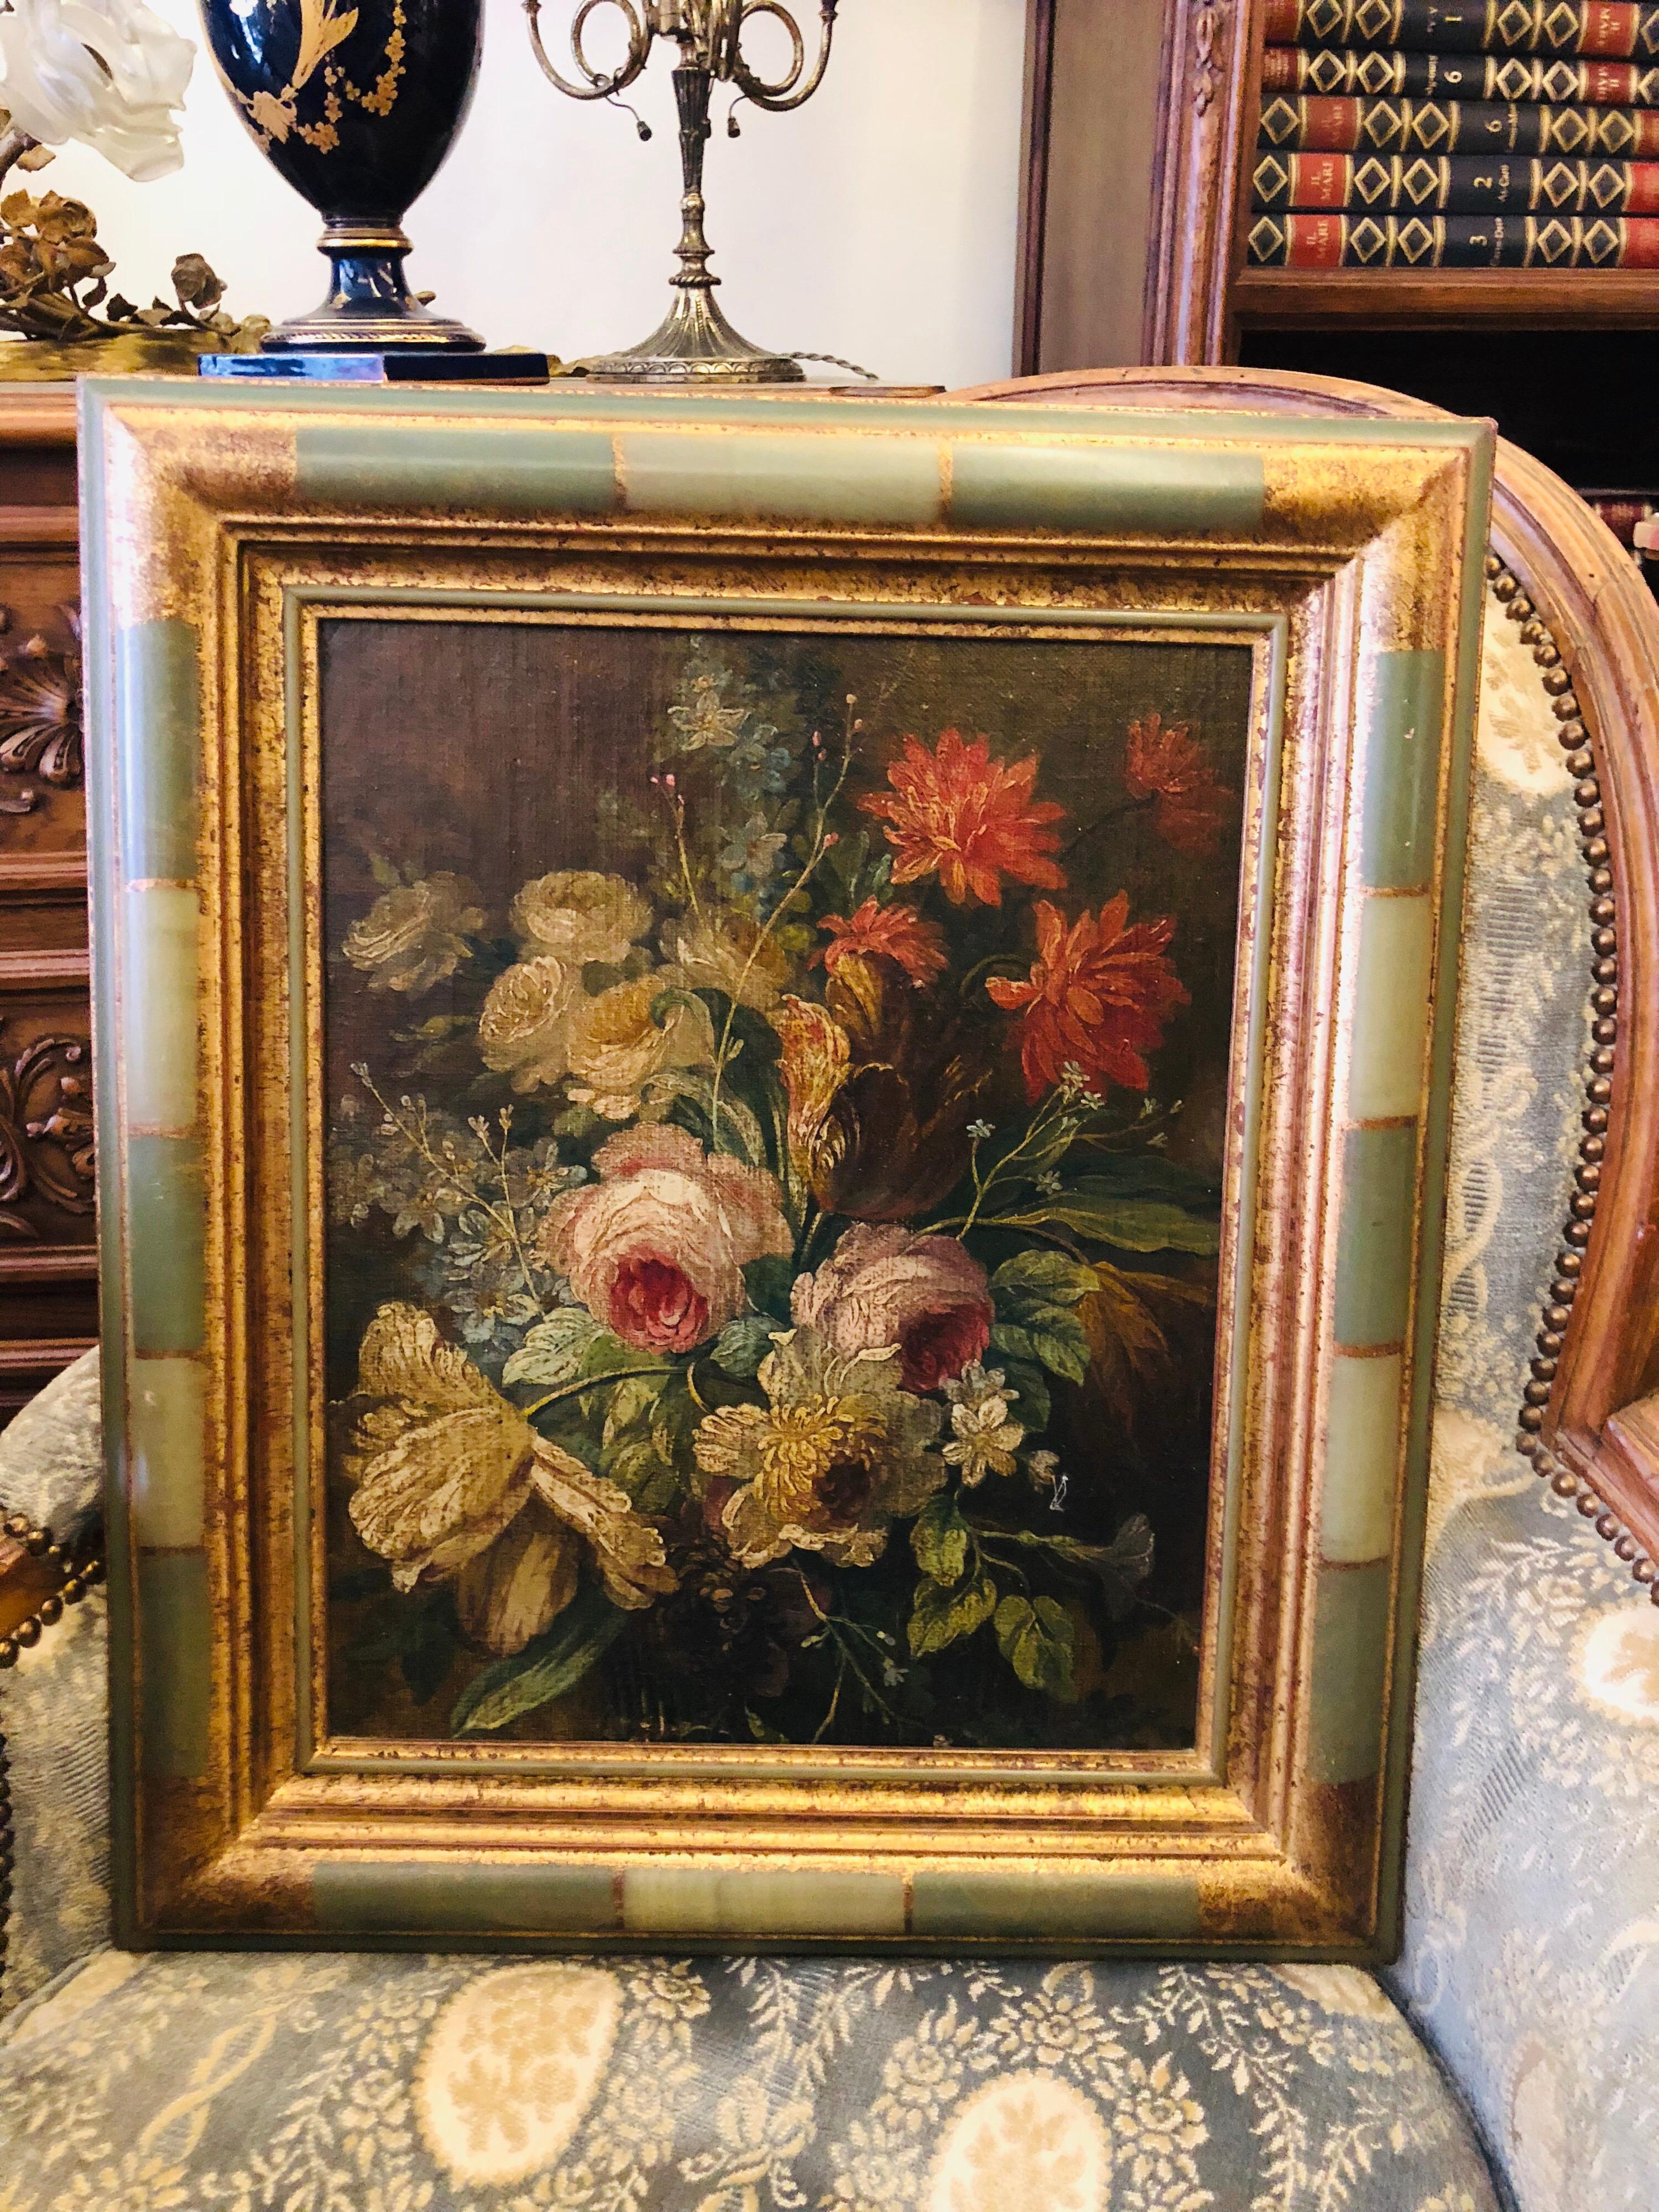 19th century painting of beautiful flowers, oil on canvas,
France.